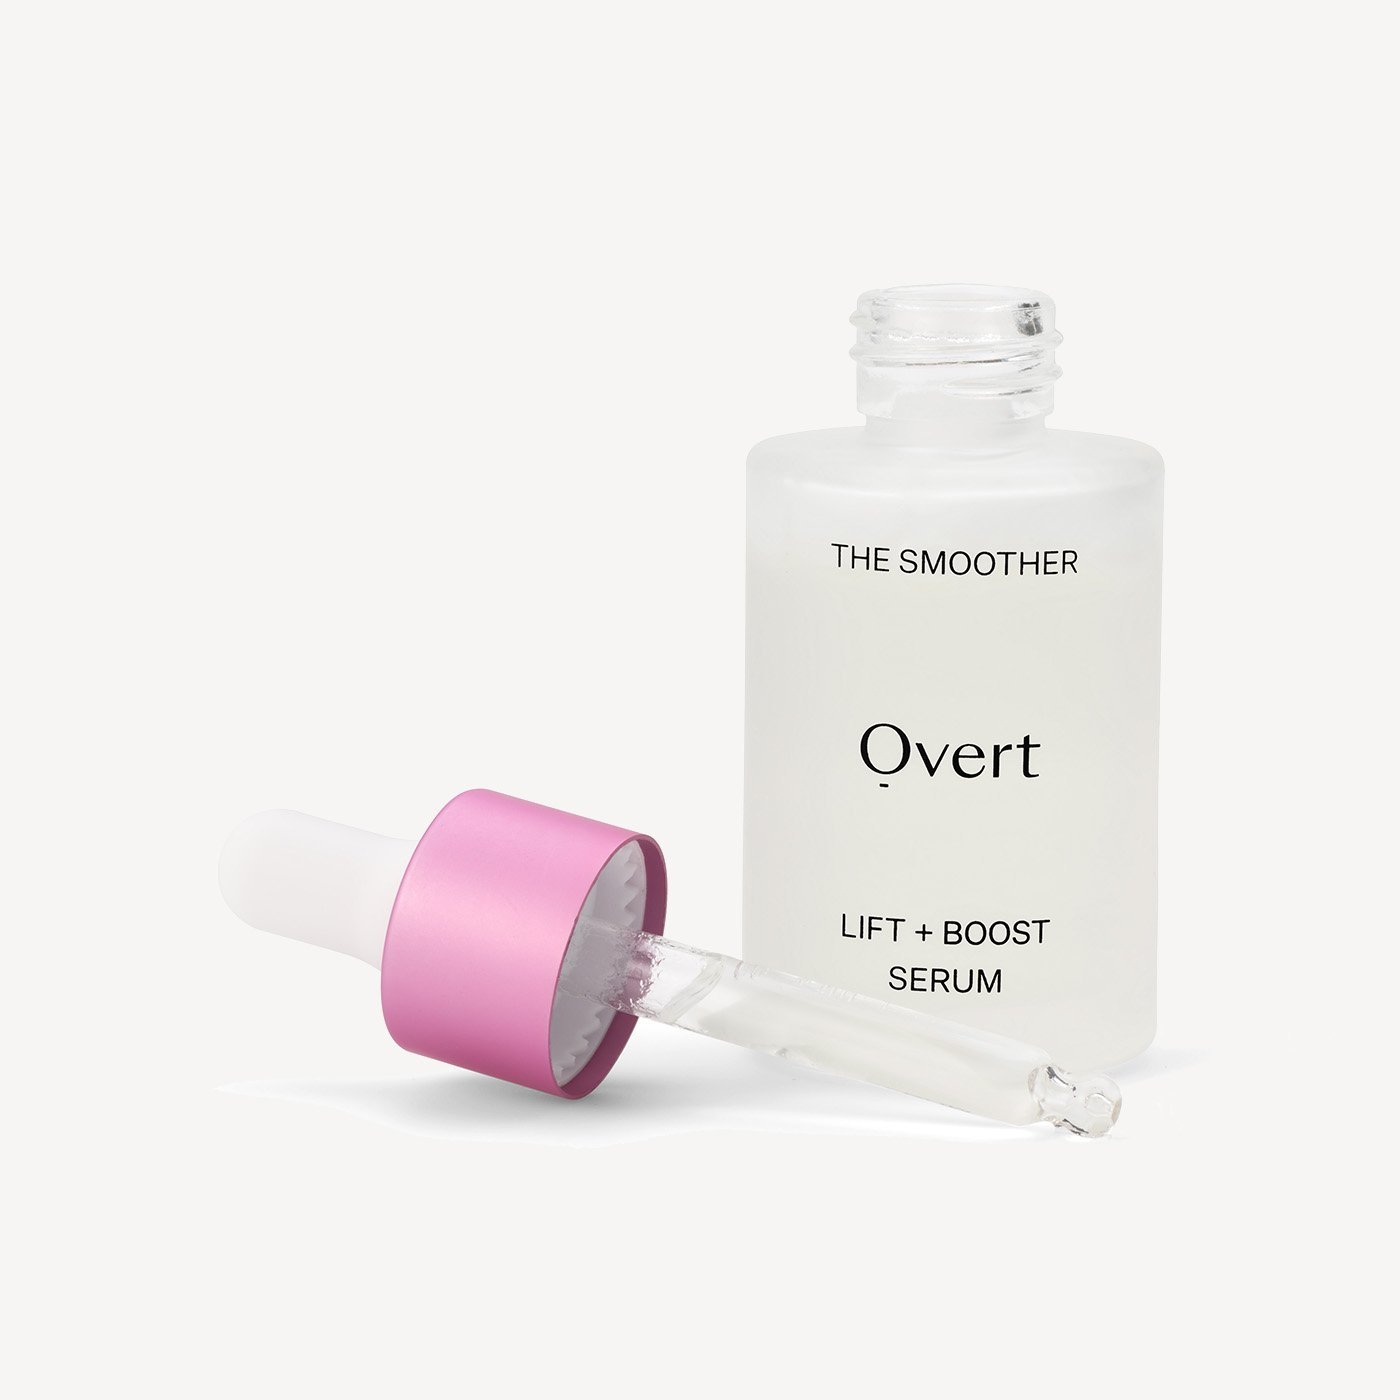 The Smoother by Overt